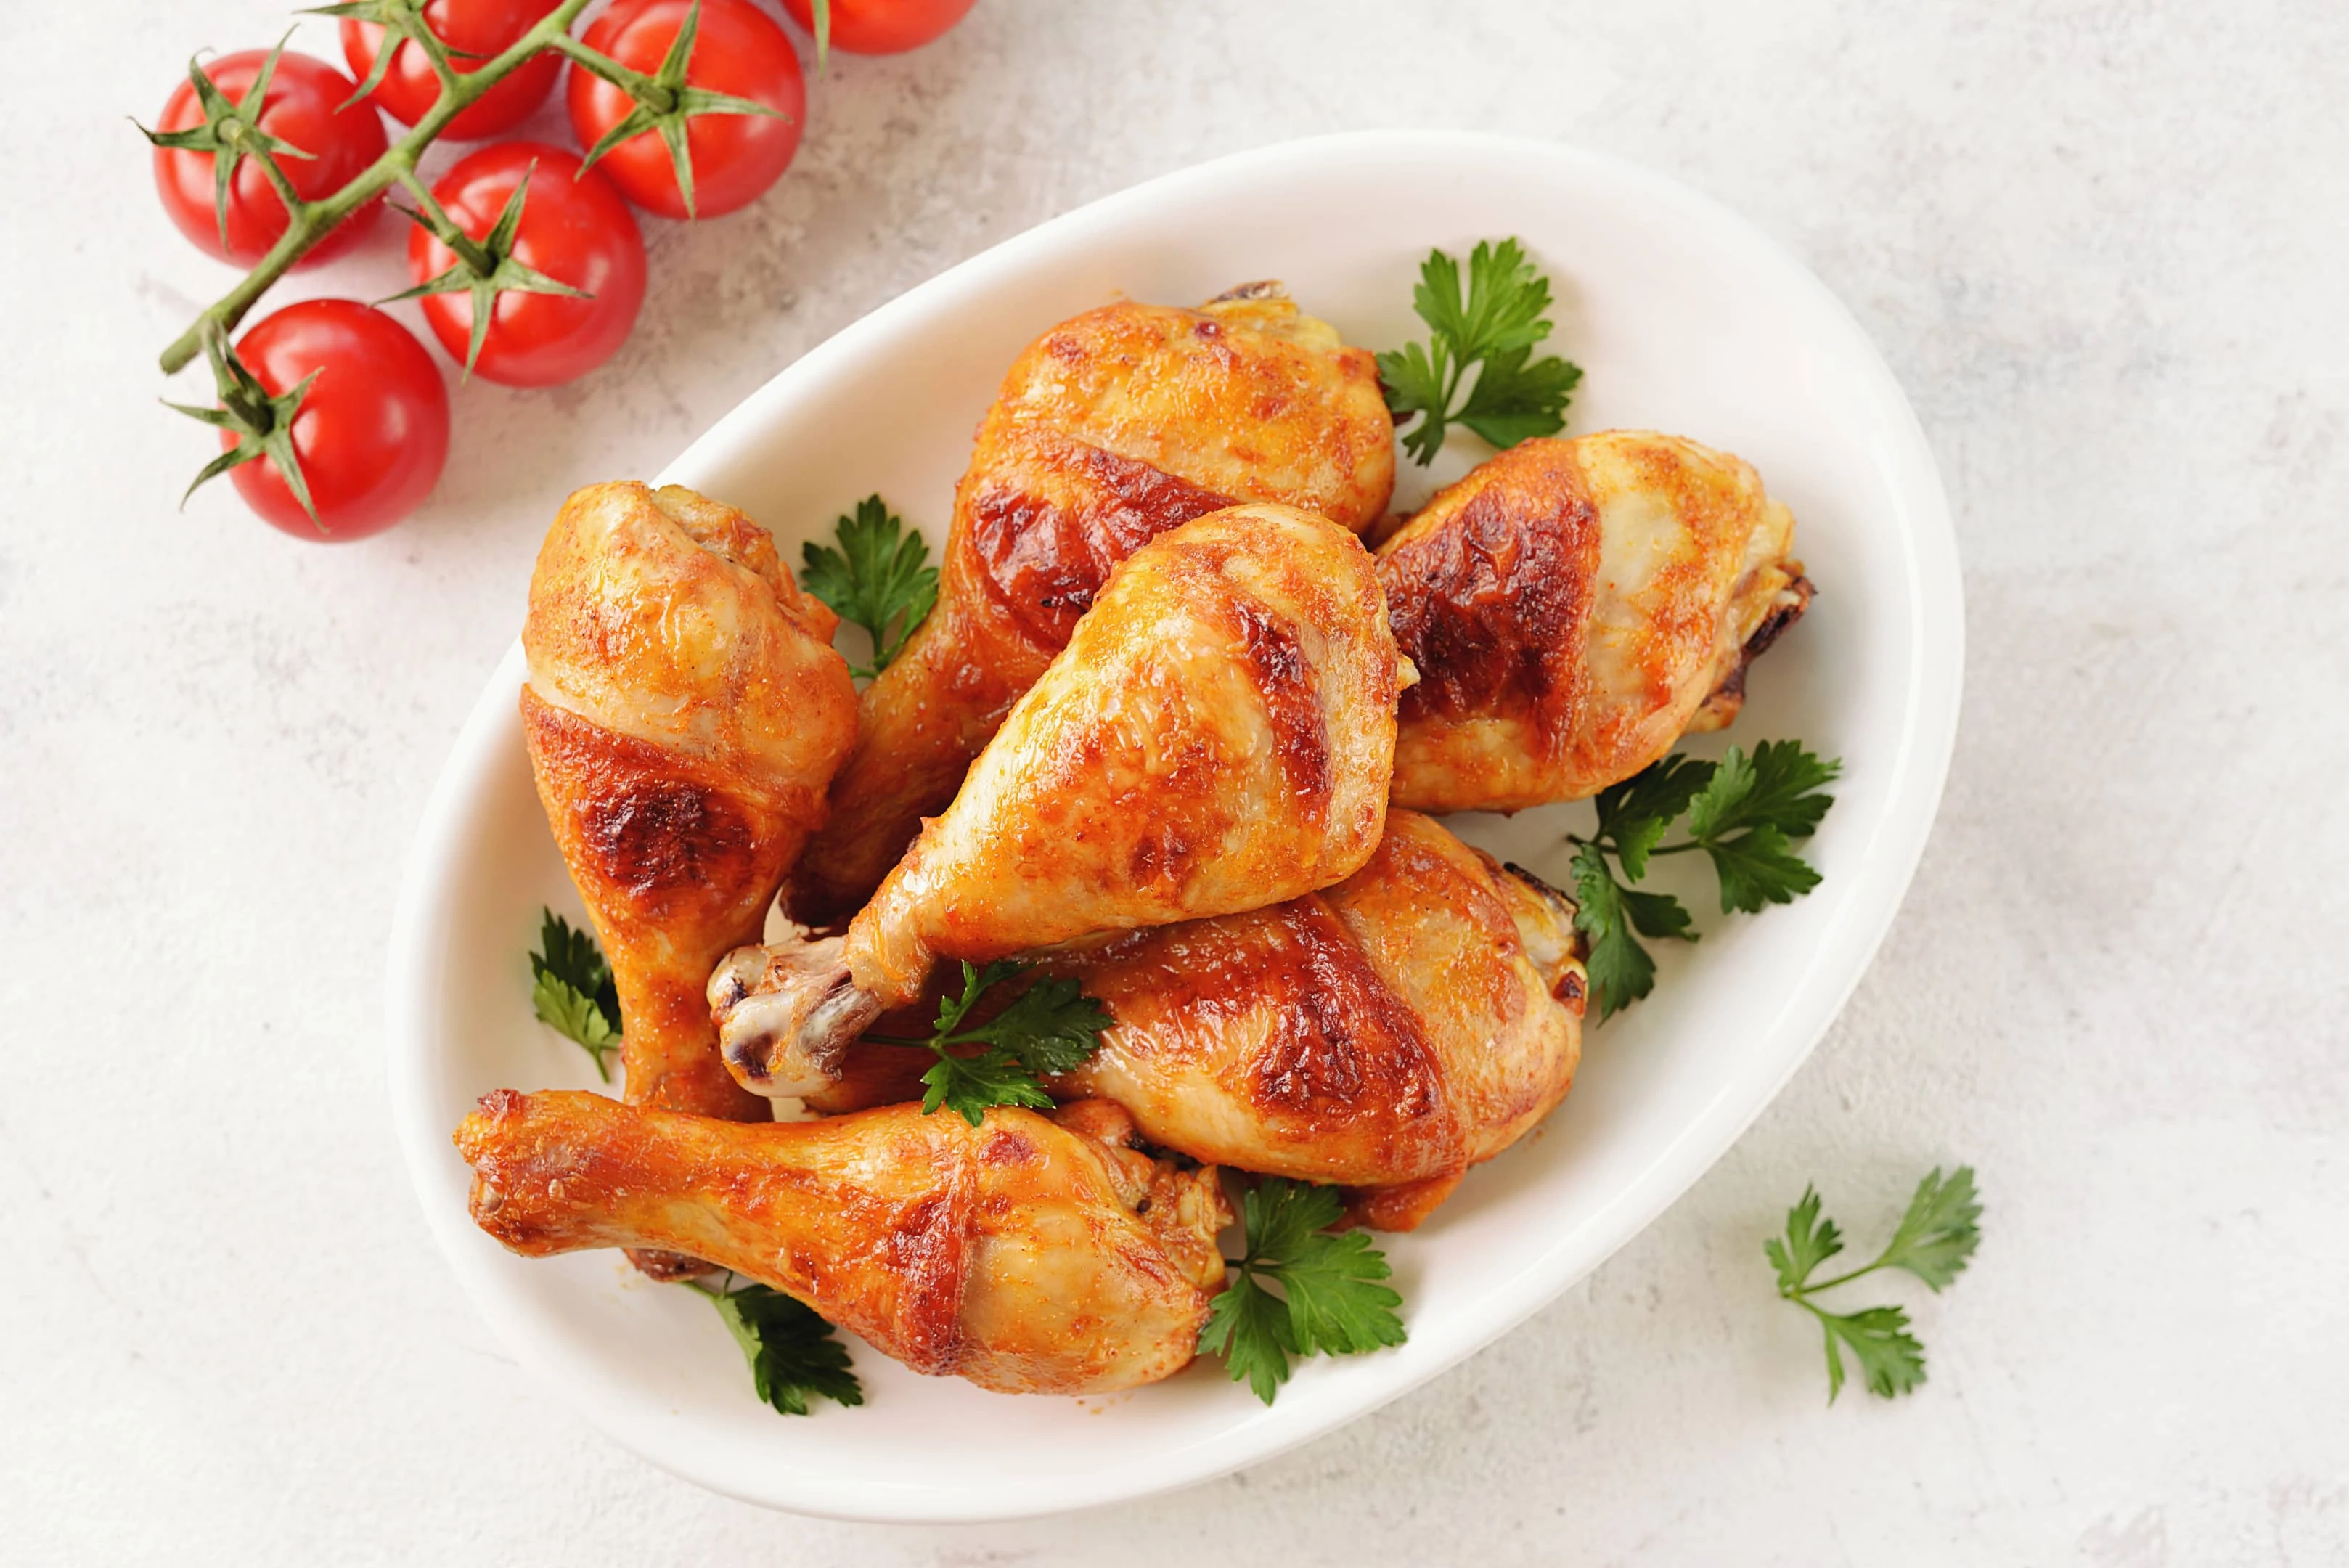 Chicken drumsticks baked with tomato sauce soy sauce and olive oil